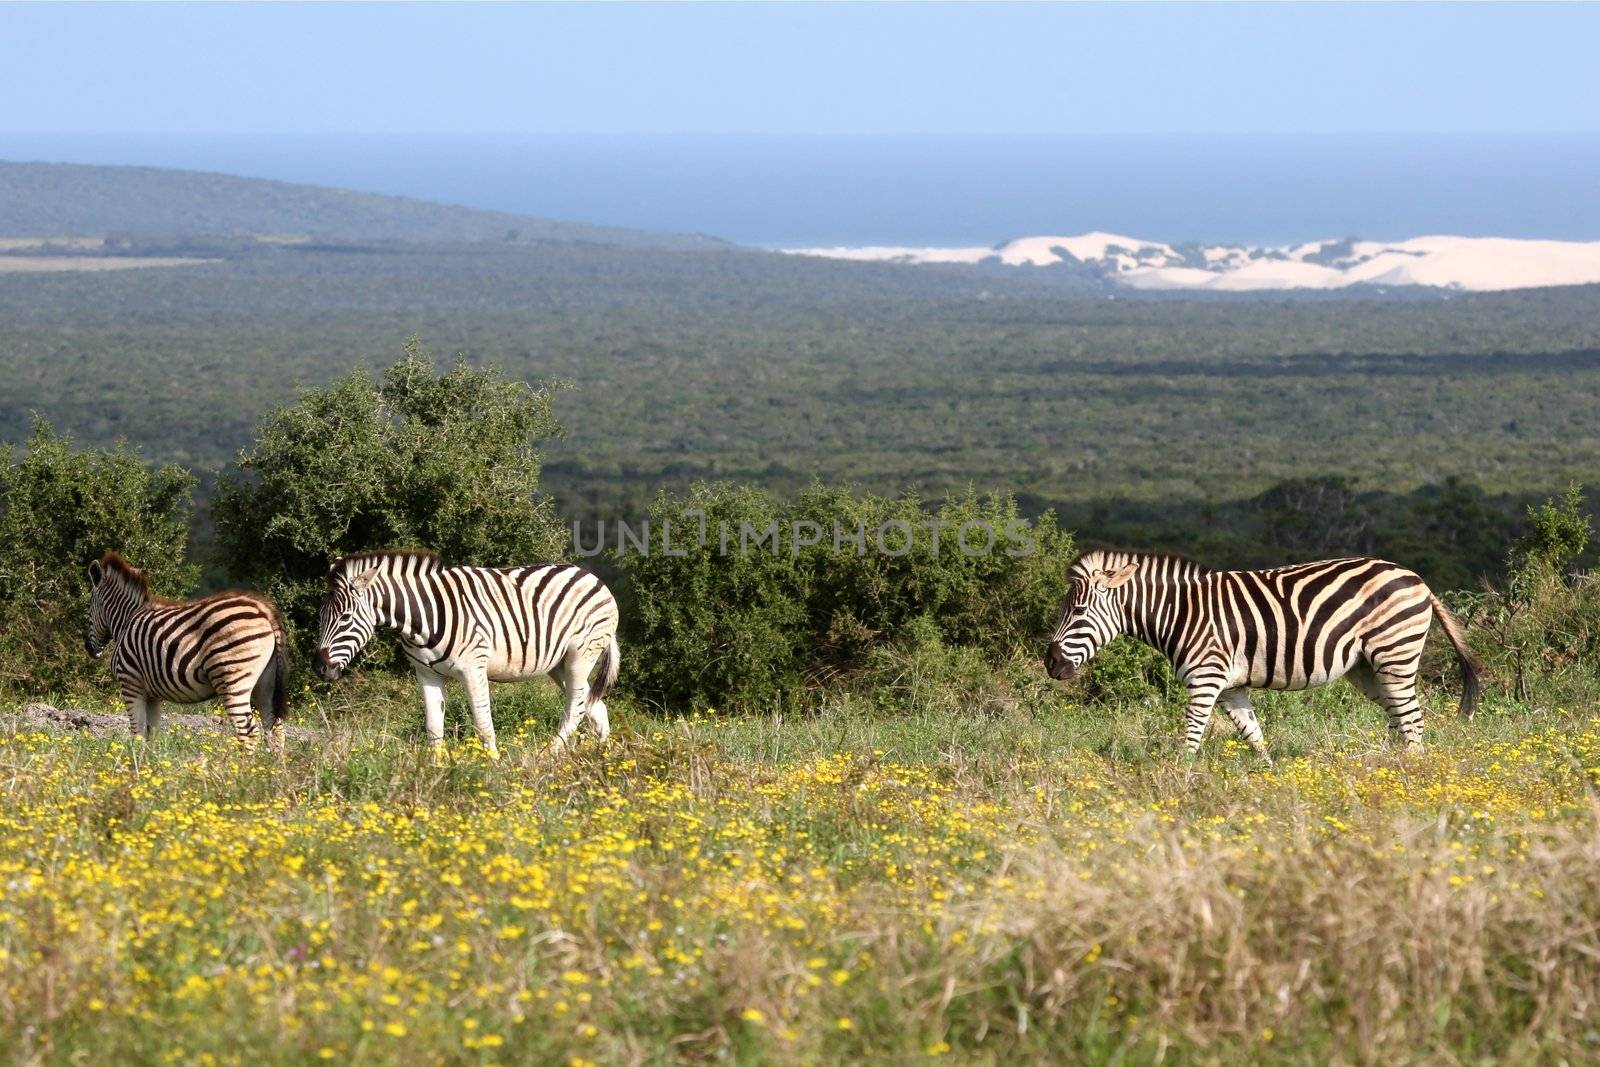 Plains zebras in wild flowers with the coast in the background